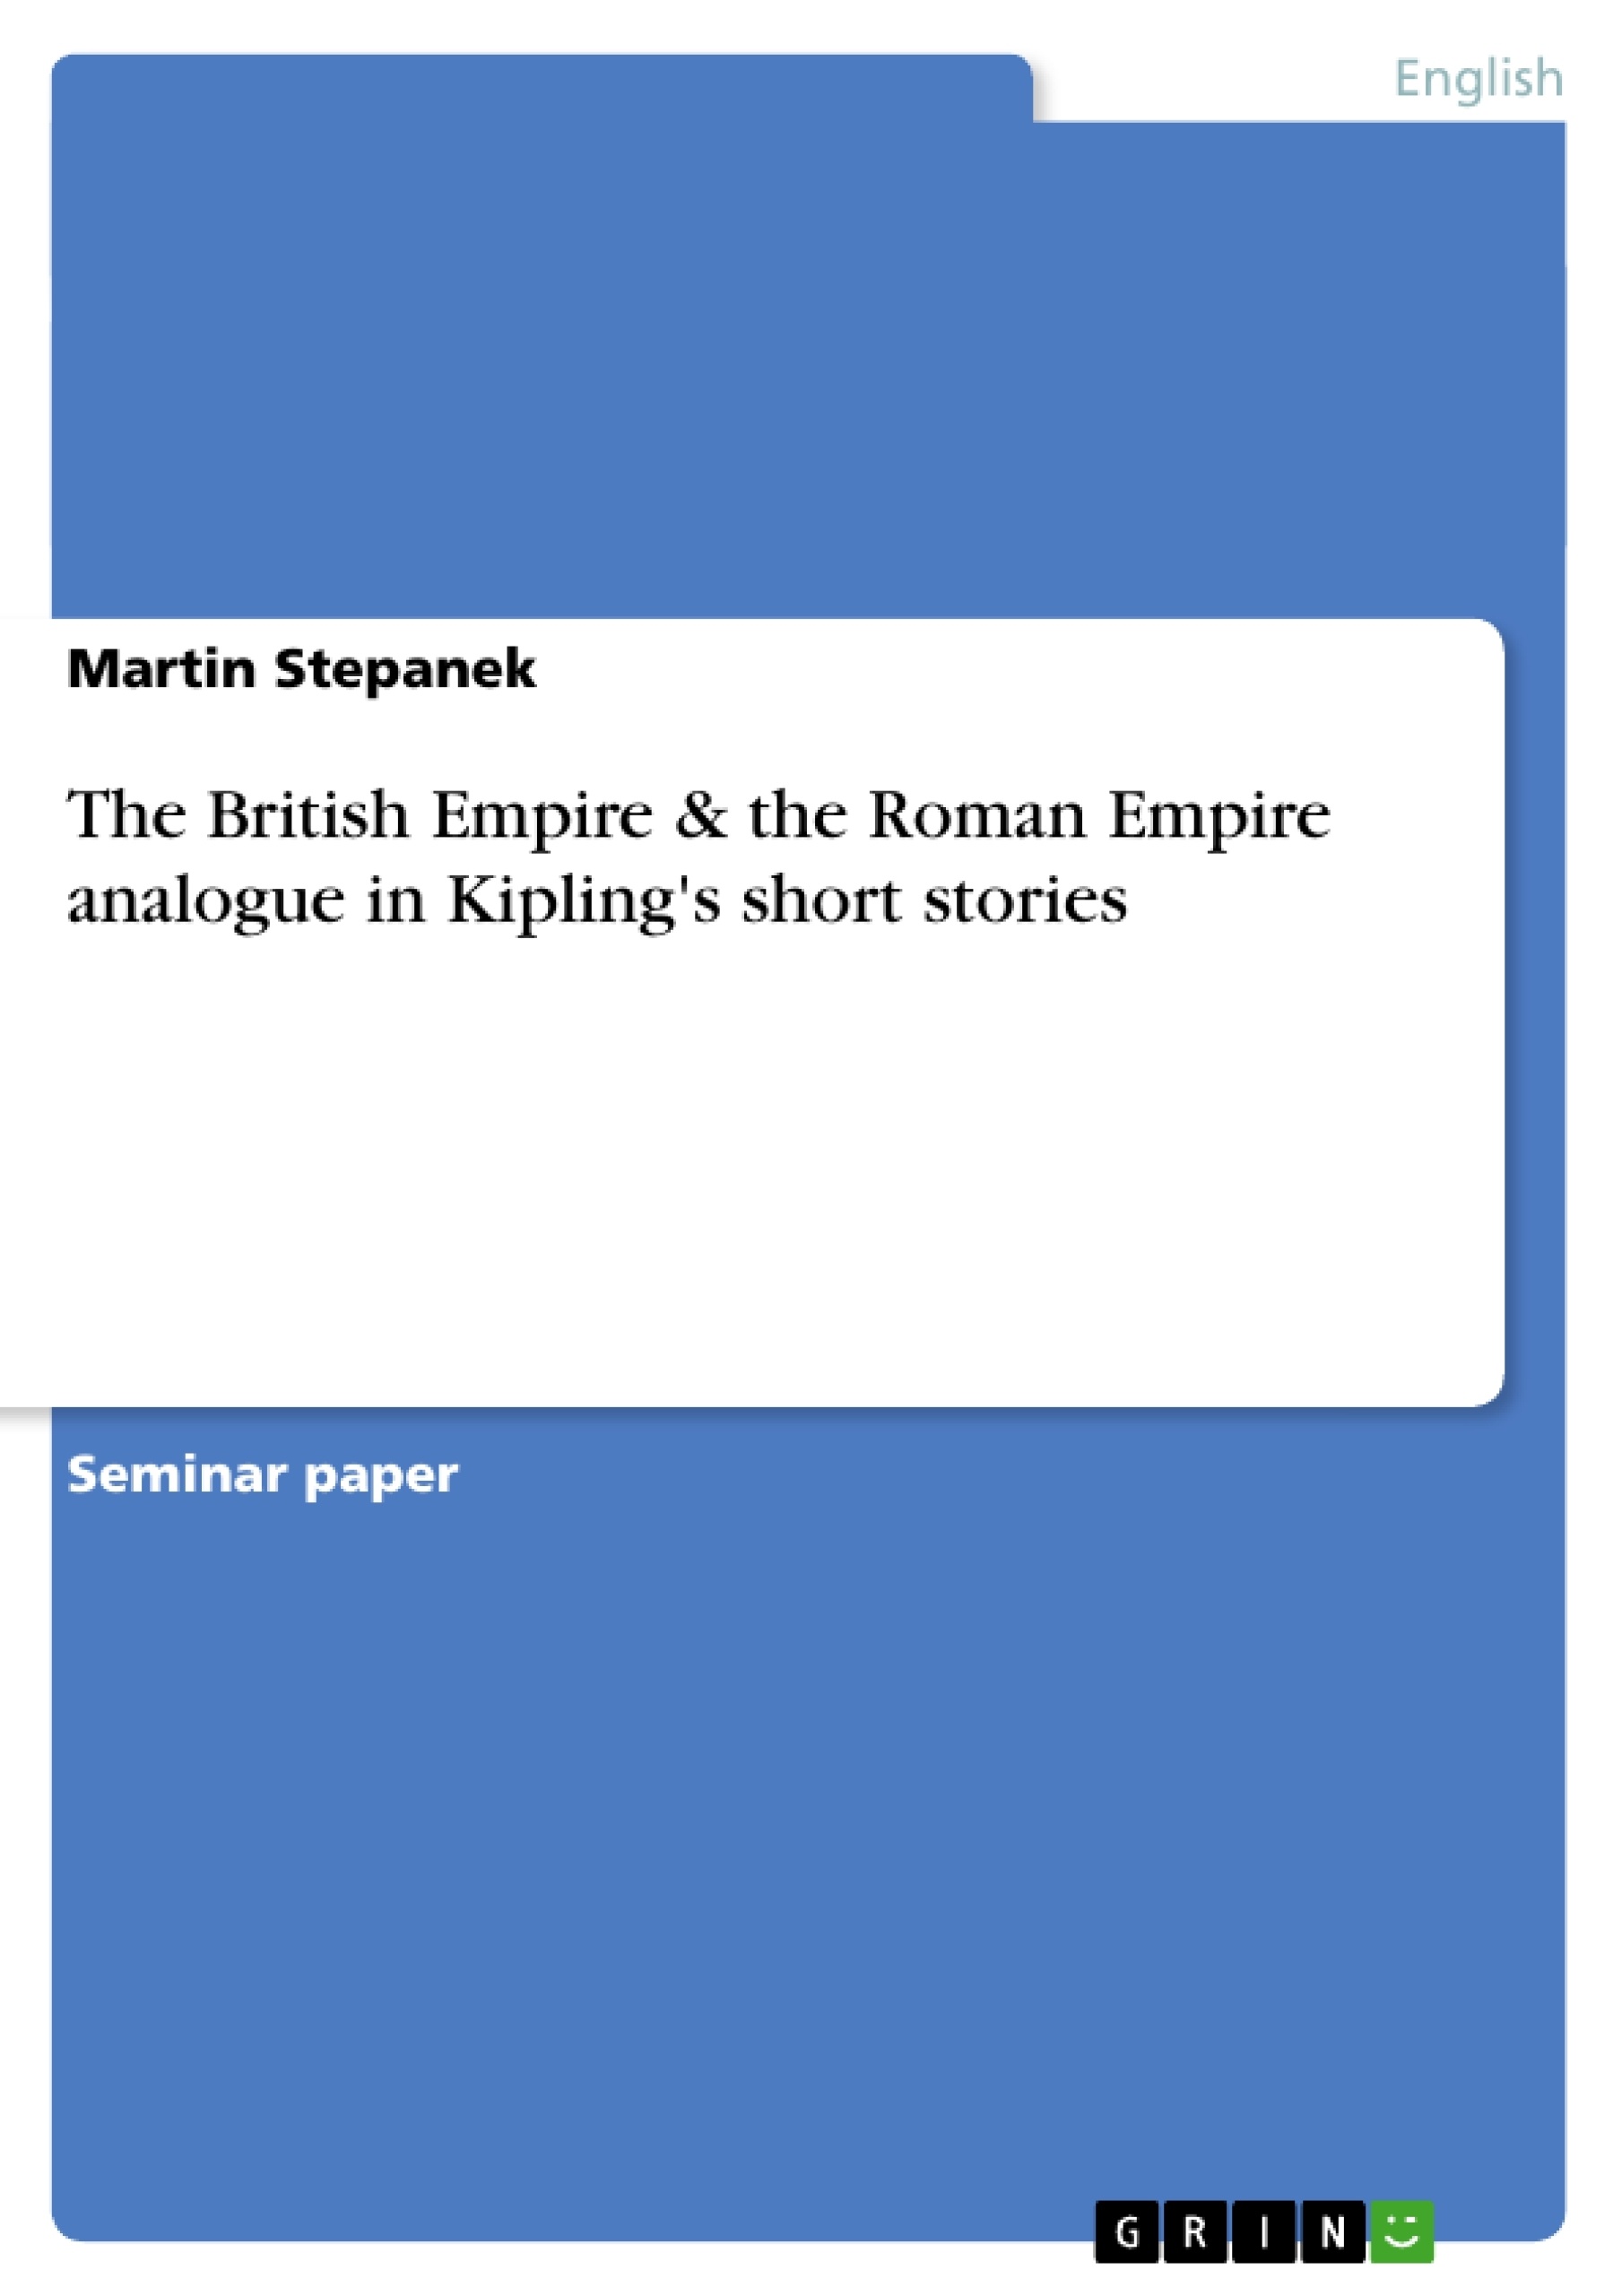 Title: The British Empire & the Roman Empire analogue in Kipling's short stories